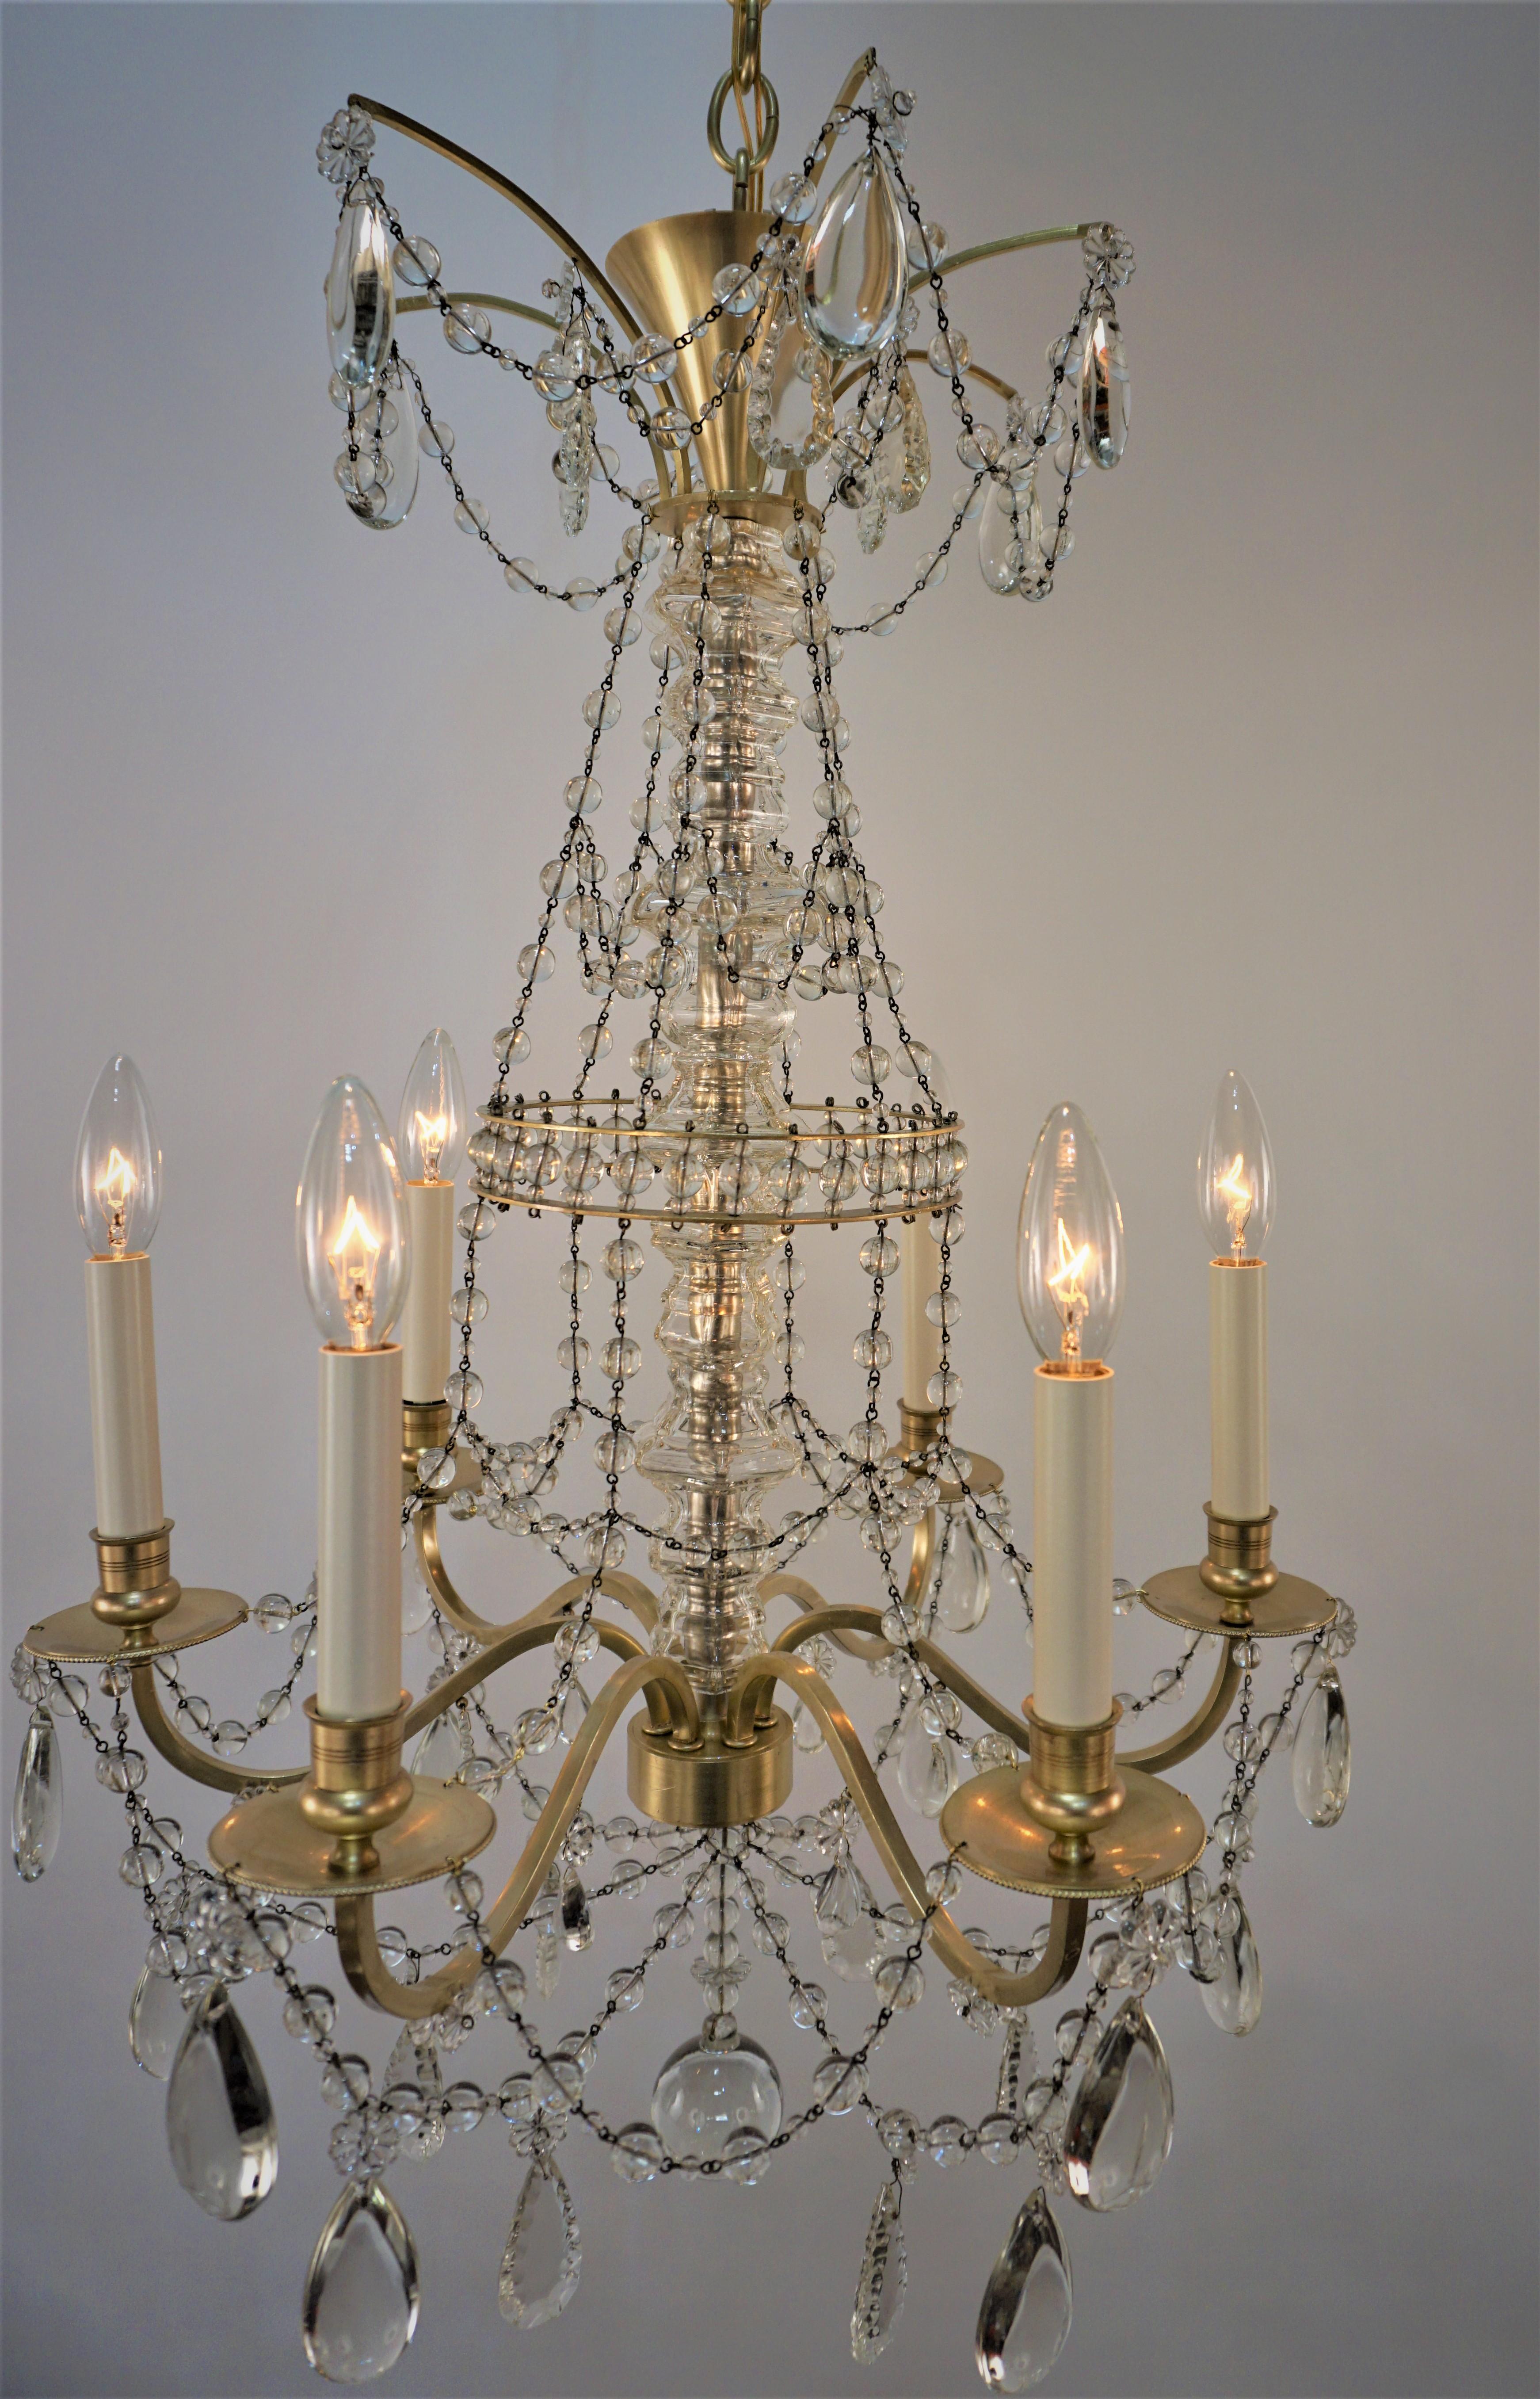 Superb crystal chandelier, crafted in France in 1930s by famous lighting company Bagues. Elegant design six light crystal and bronze chandelier.
Professionally rewired and ready for installation.
Measurement: width 27